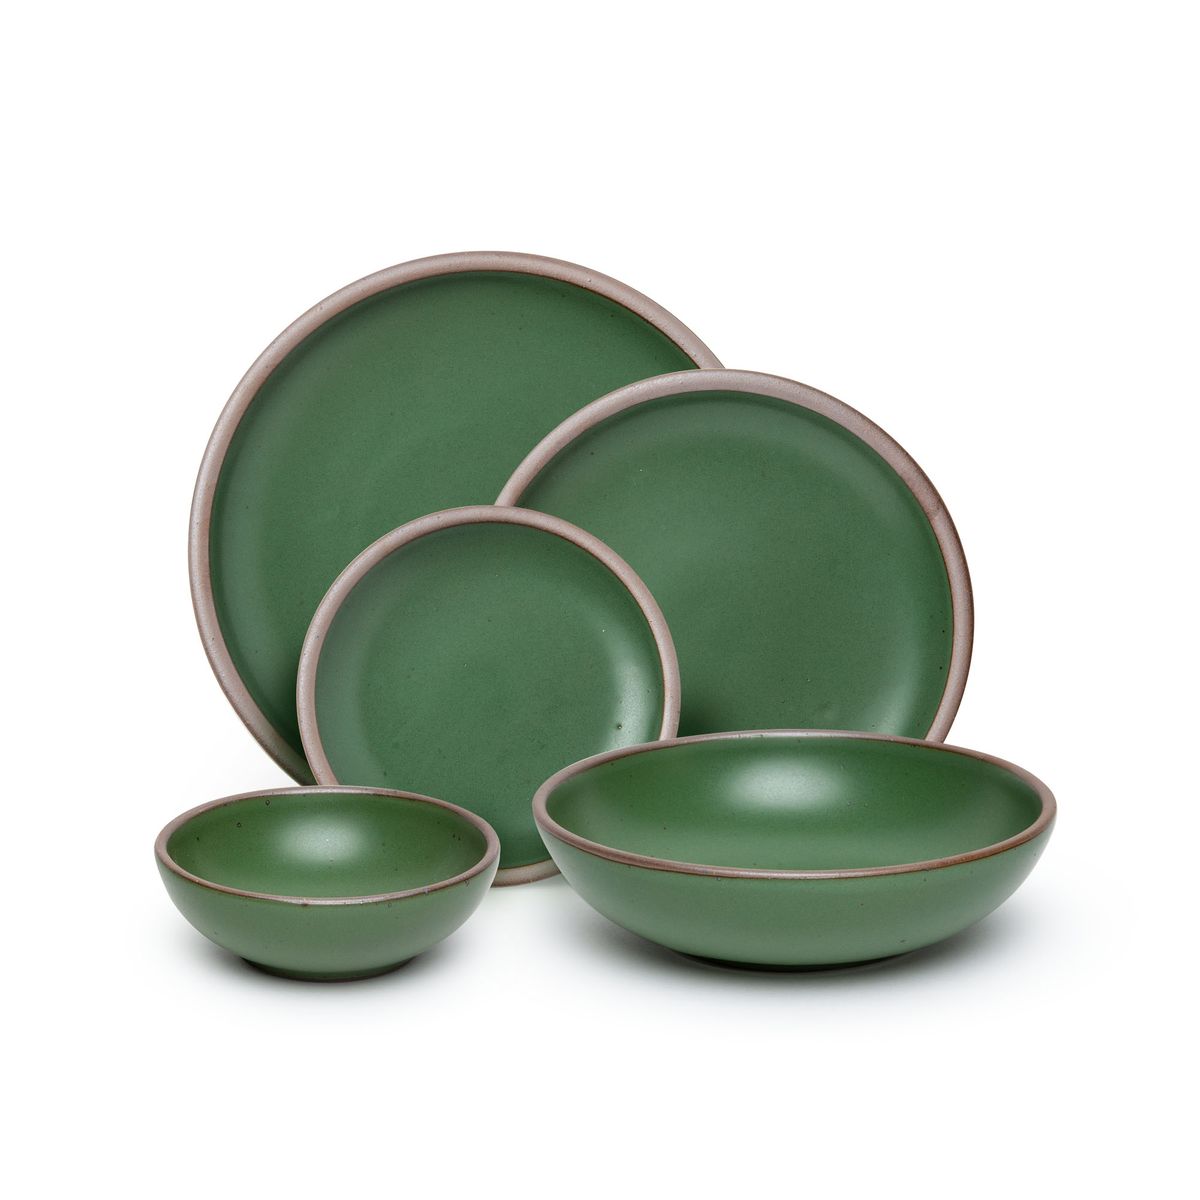 A breakfast bowl, everyday bowl, cake plate, side plate and dinner plate paired together in a deep, verdant green featuring iron speckles